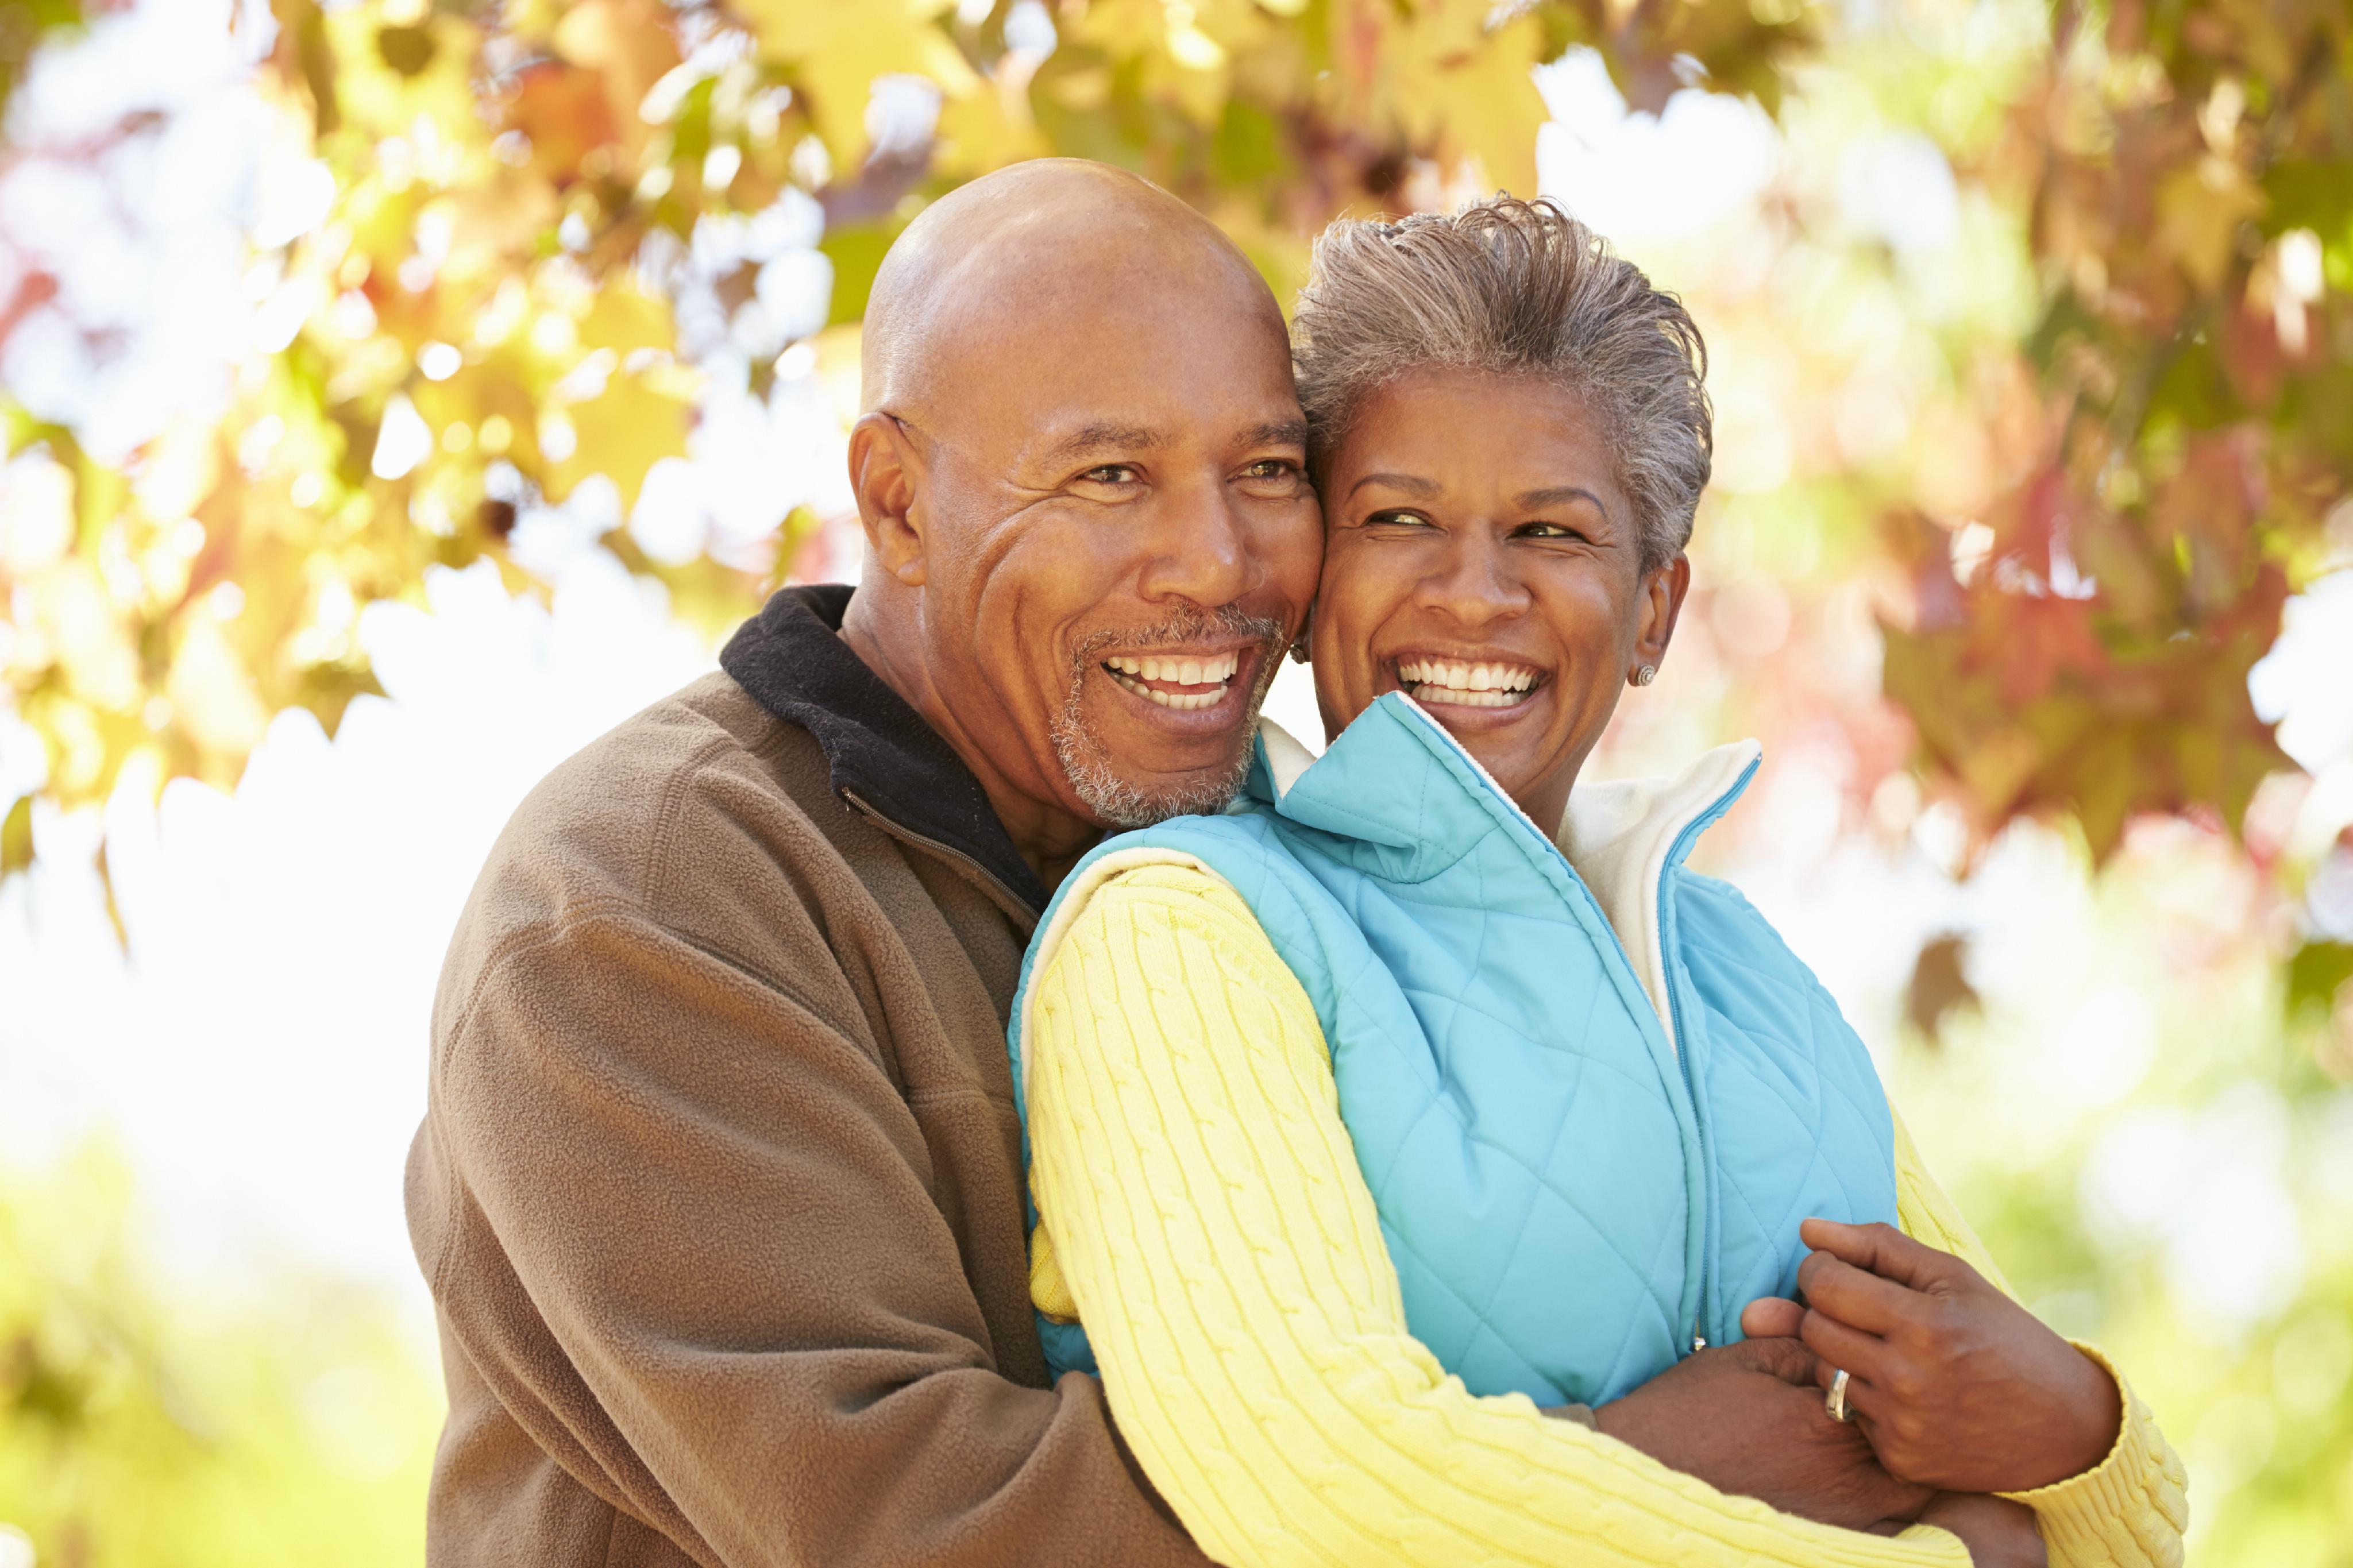 Seniors Health, Fitness, and Wellbeing Information  More Life Health —  More Life Health - Seniors Health & Fitness